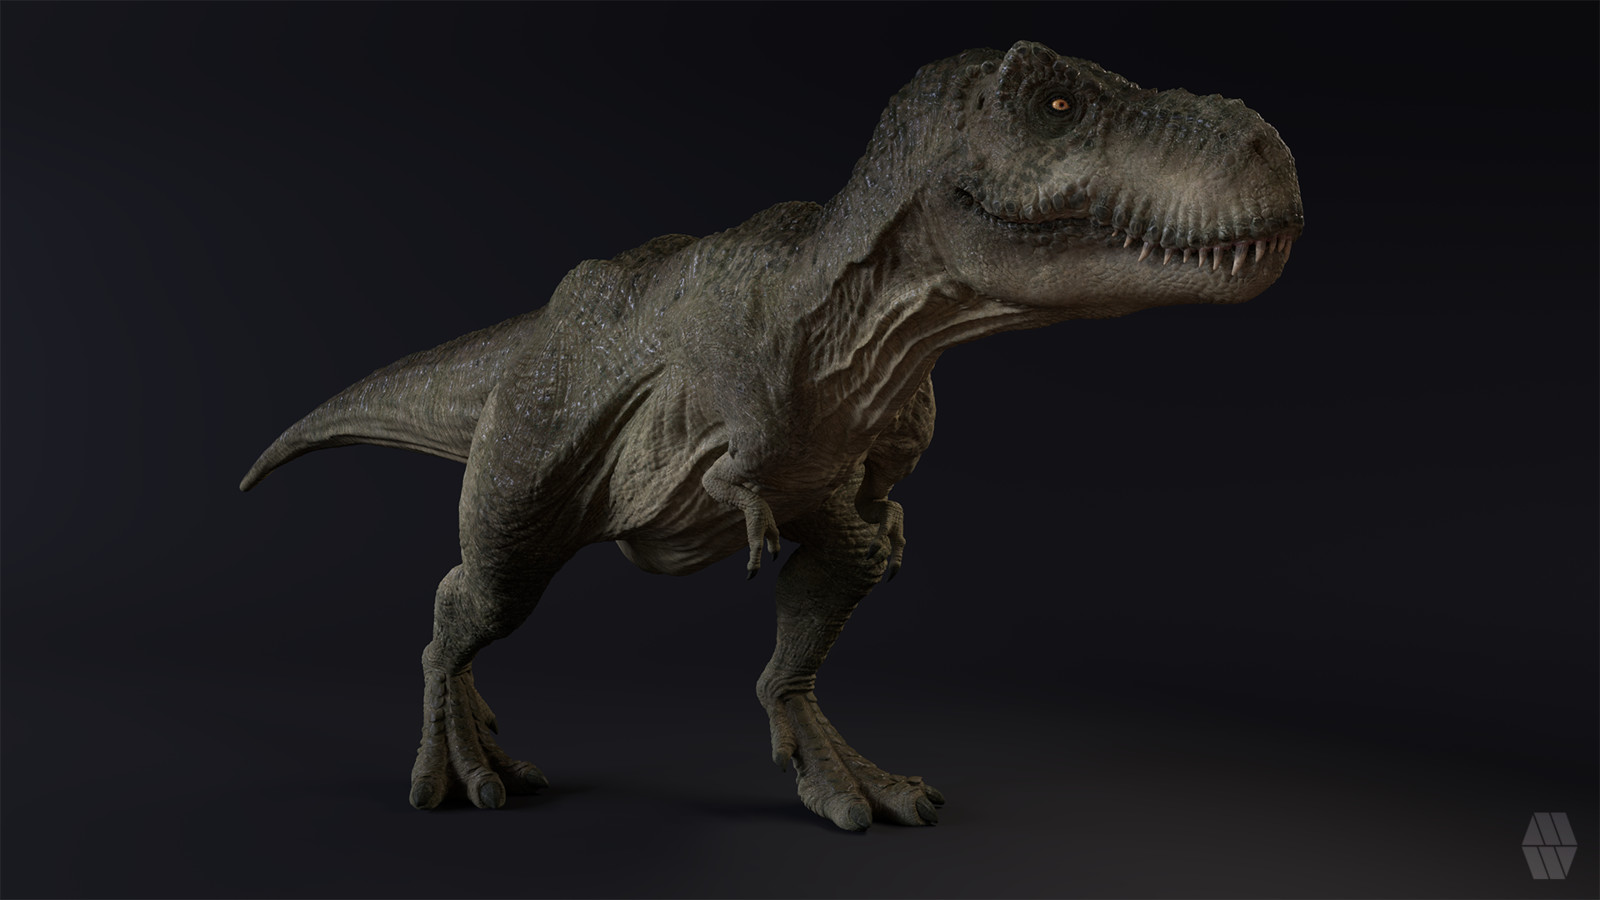 (Re-visited) Trex Texturing and Modelling Personal Project